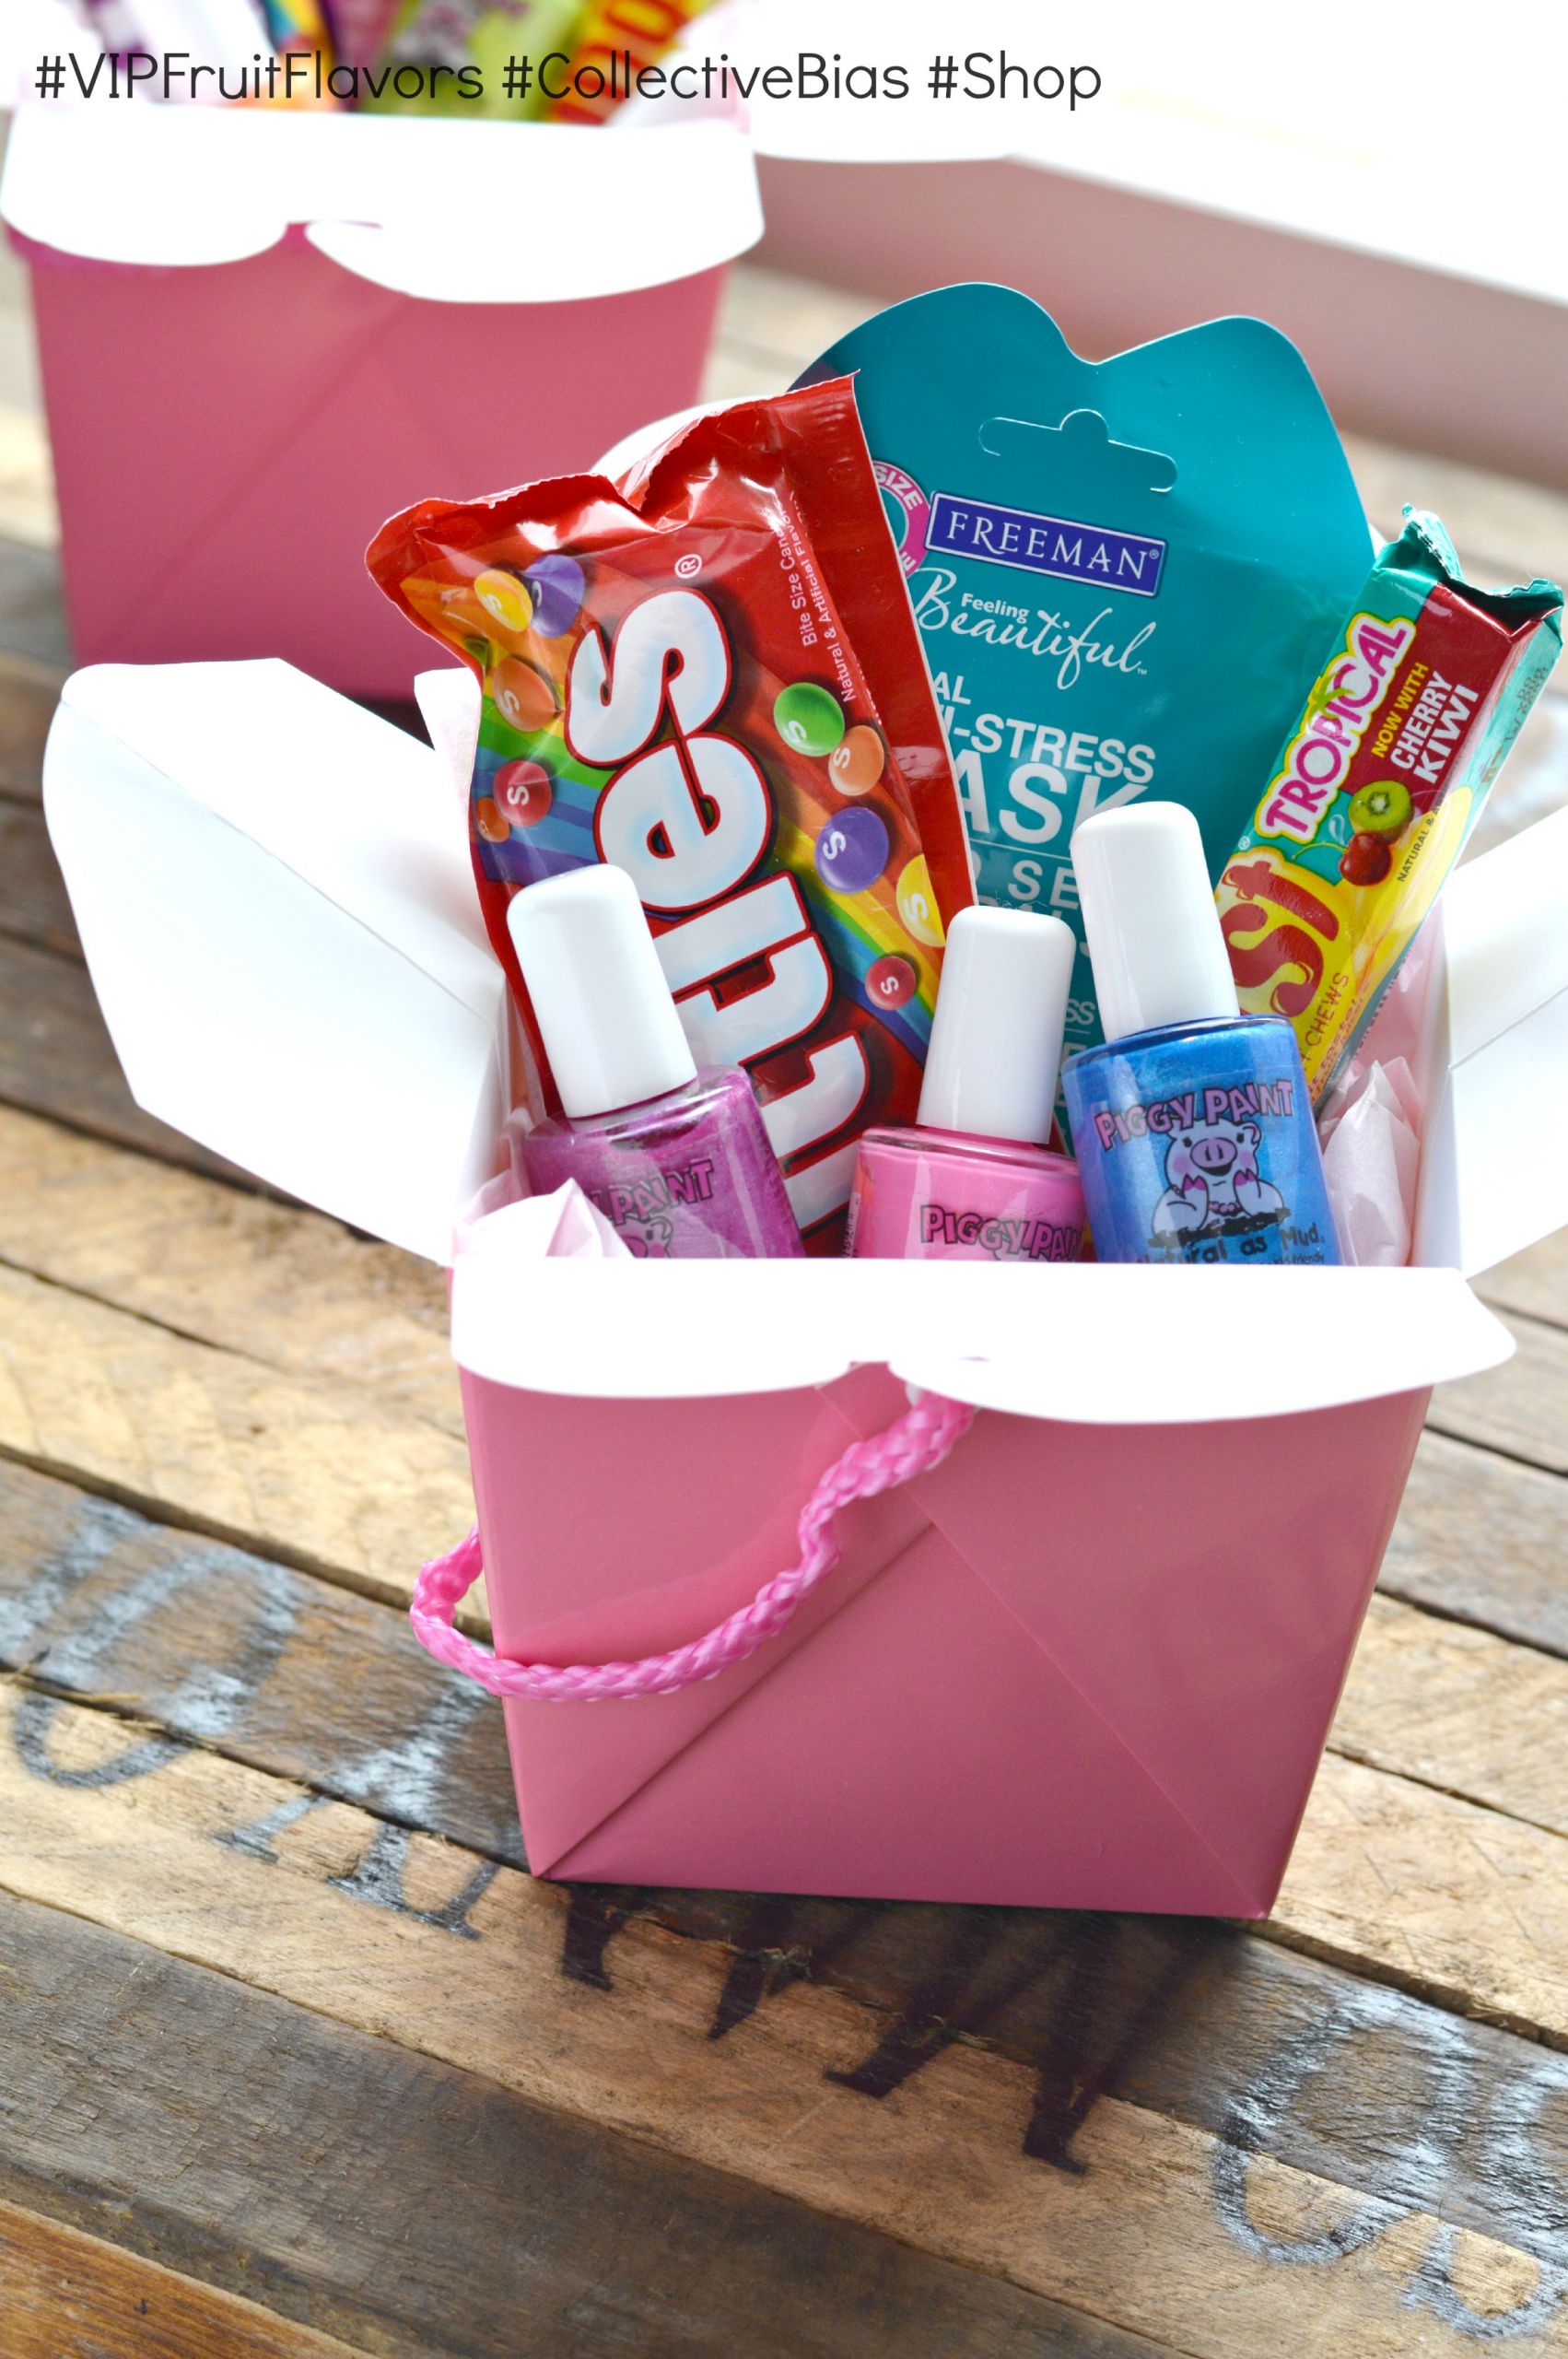 Cute DIY Gifts
 Skittles & Starburst Make For Awesome DIY Gifts It s